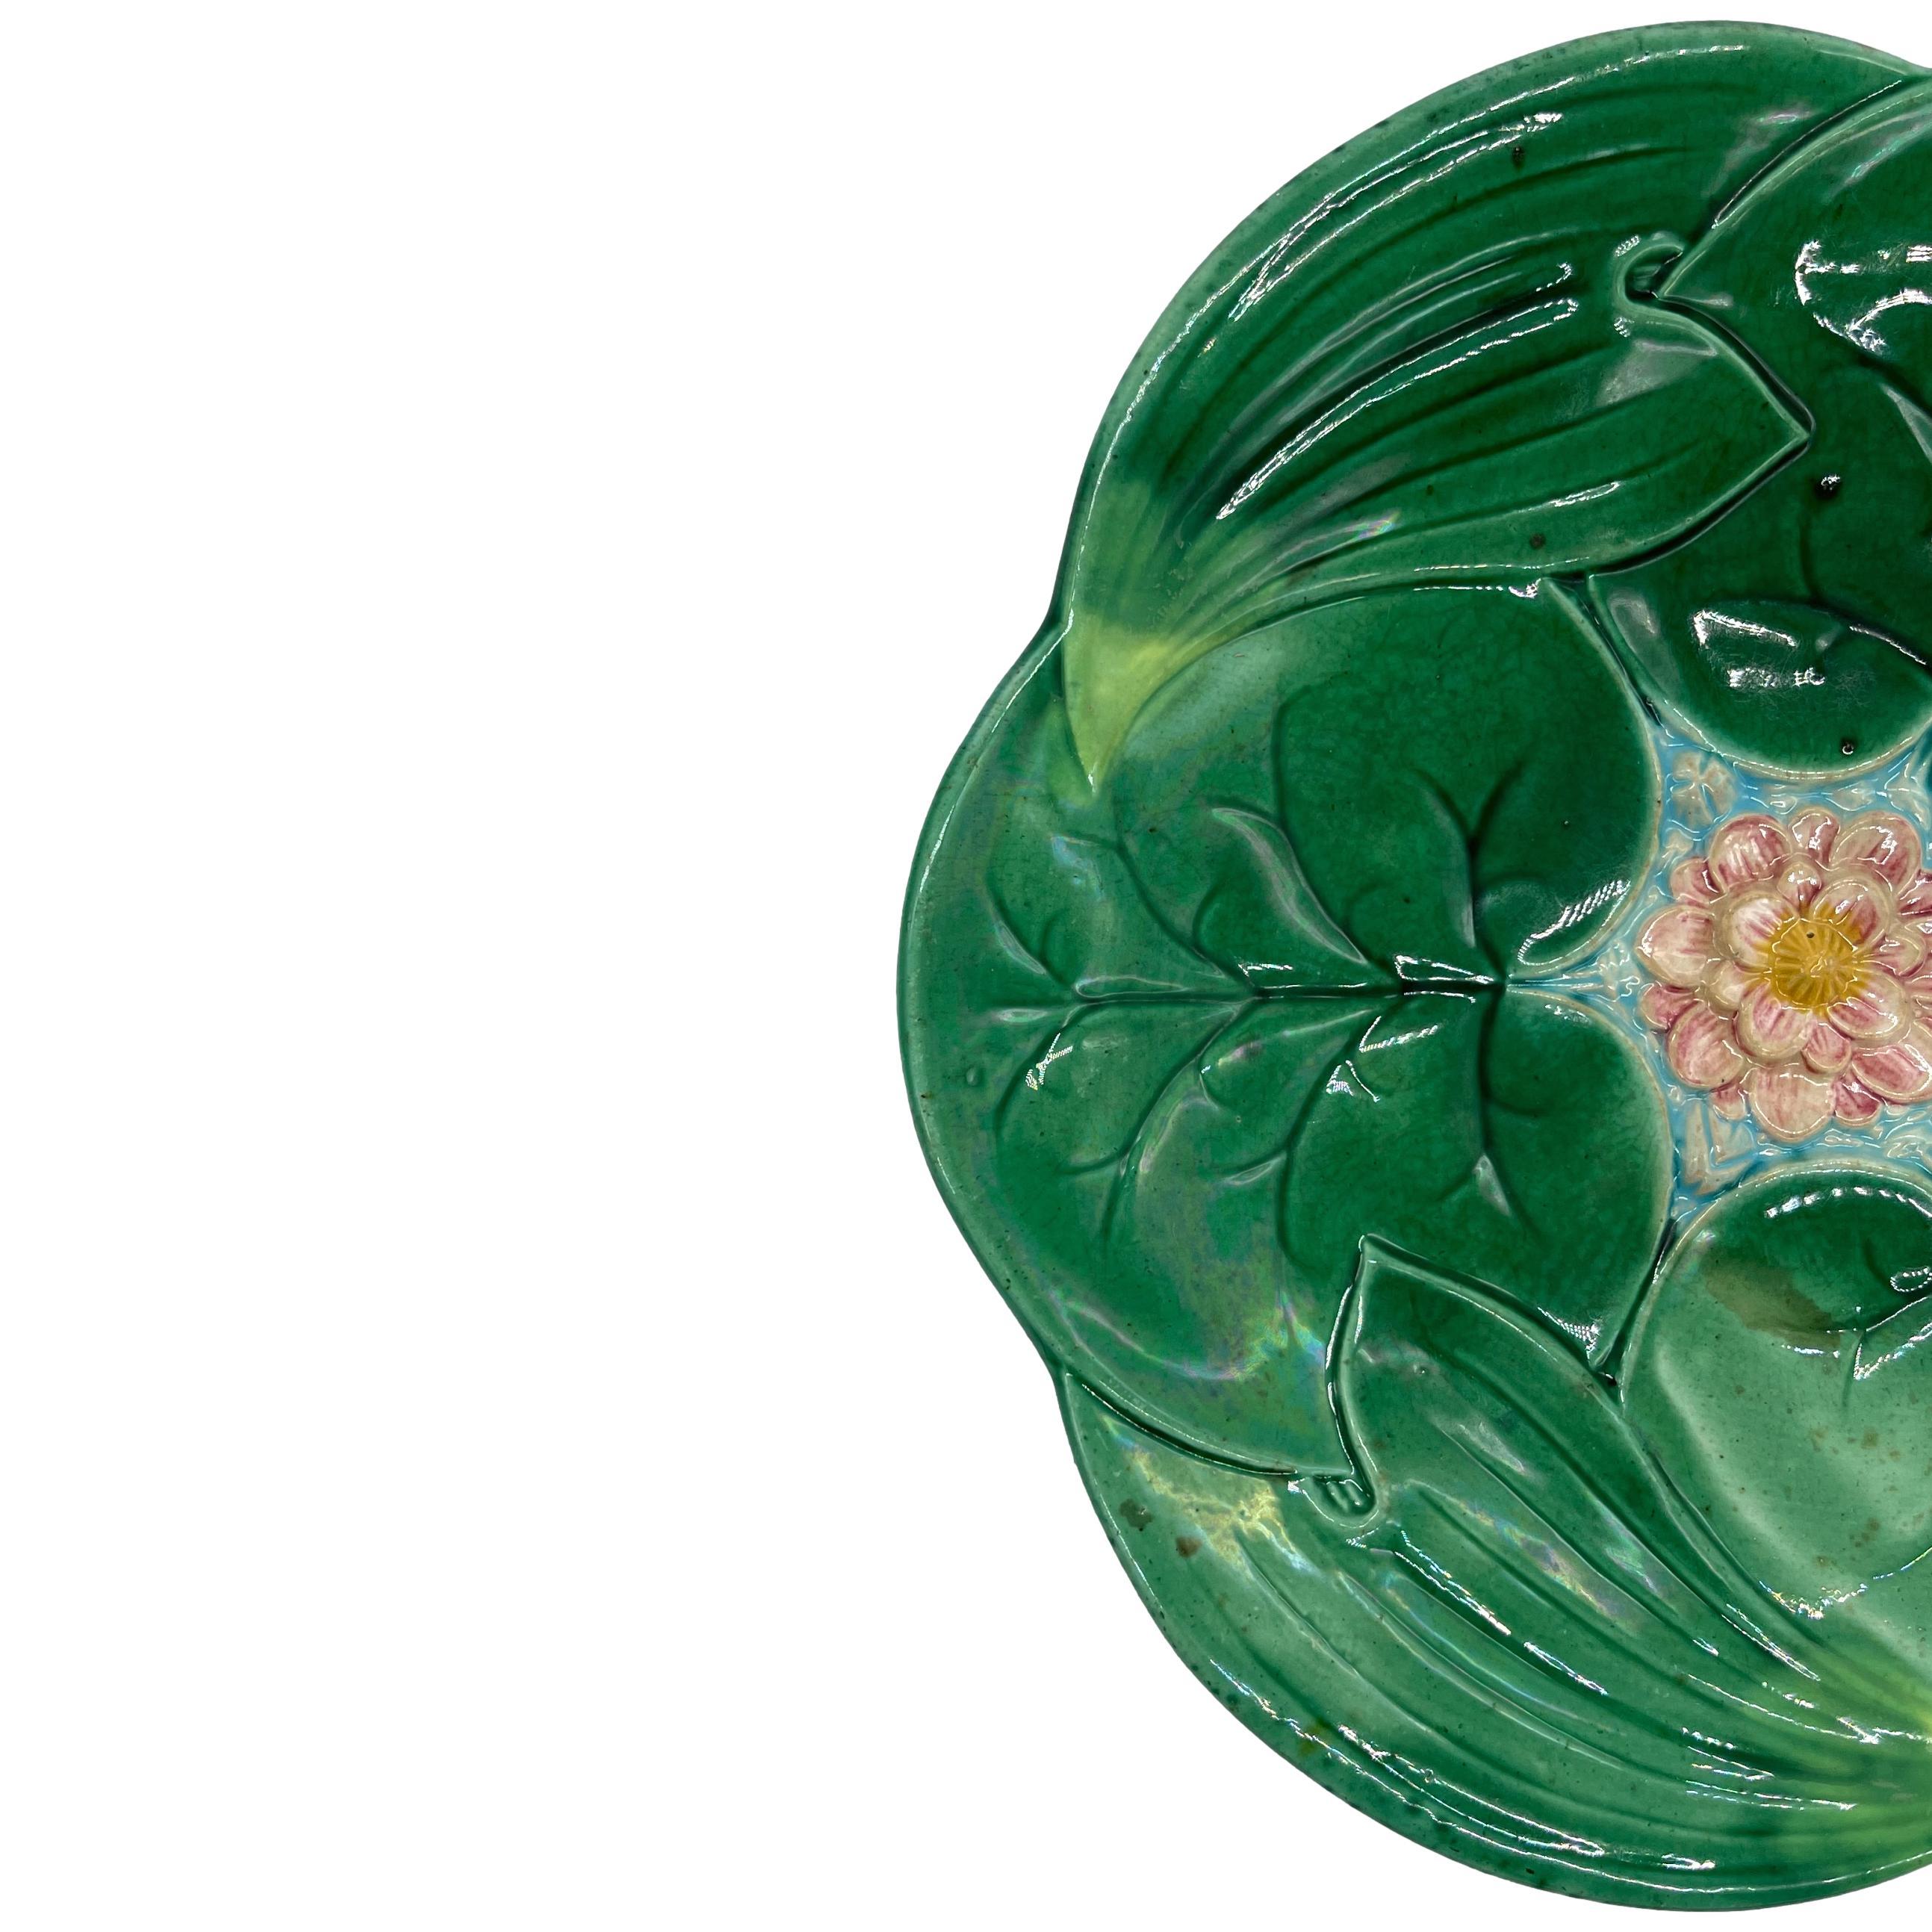 George Jones Majolica Lotus Plate, naturalistically molded as overlapping lily pads and lotus leaves, with a central relief-molded pink and yellow lotus flower on turquoise-glazed water, the reverse glazed in tortoiseshell mottling, with impressed